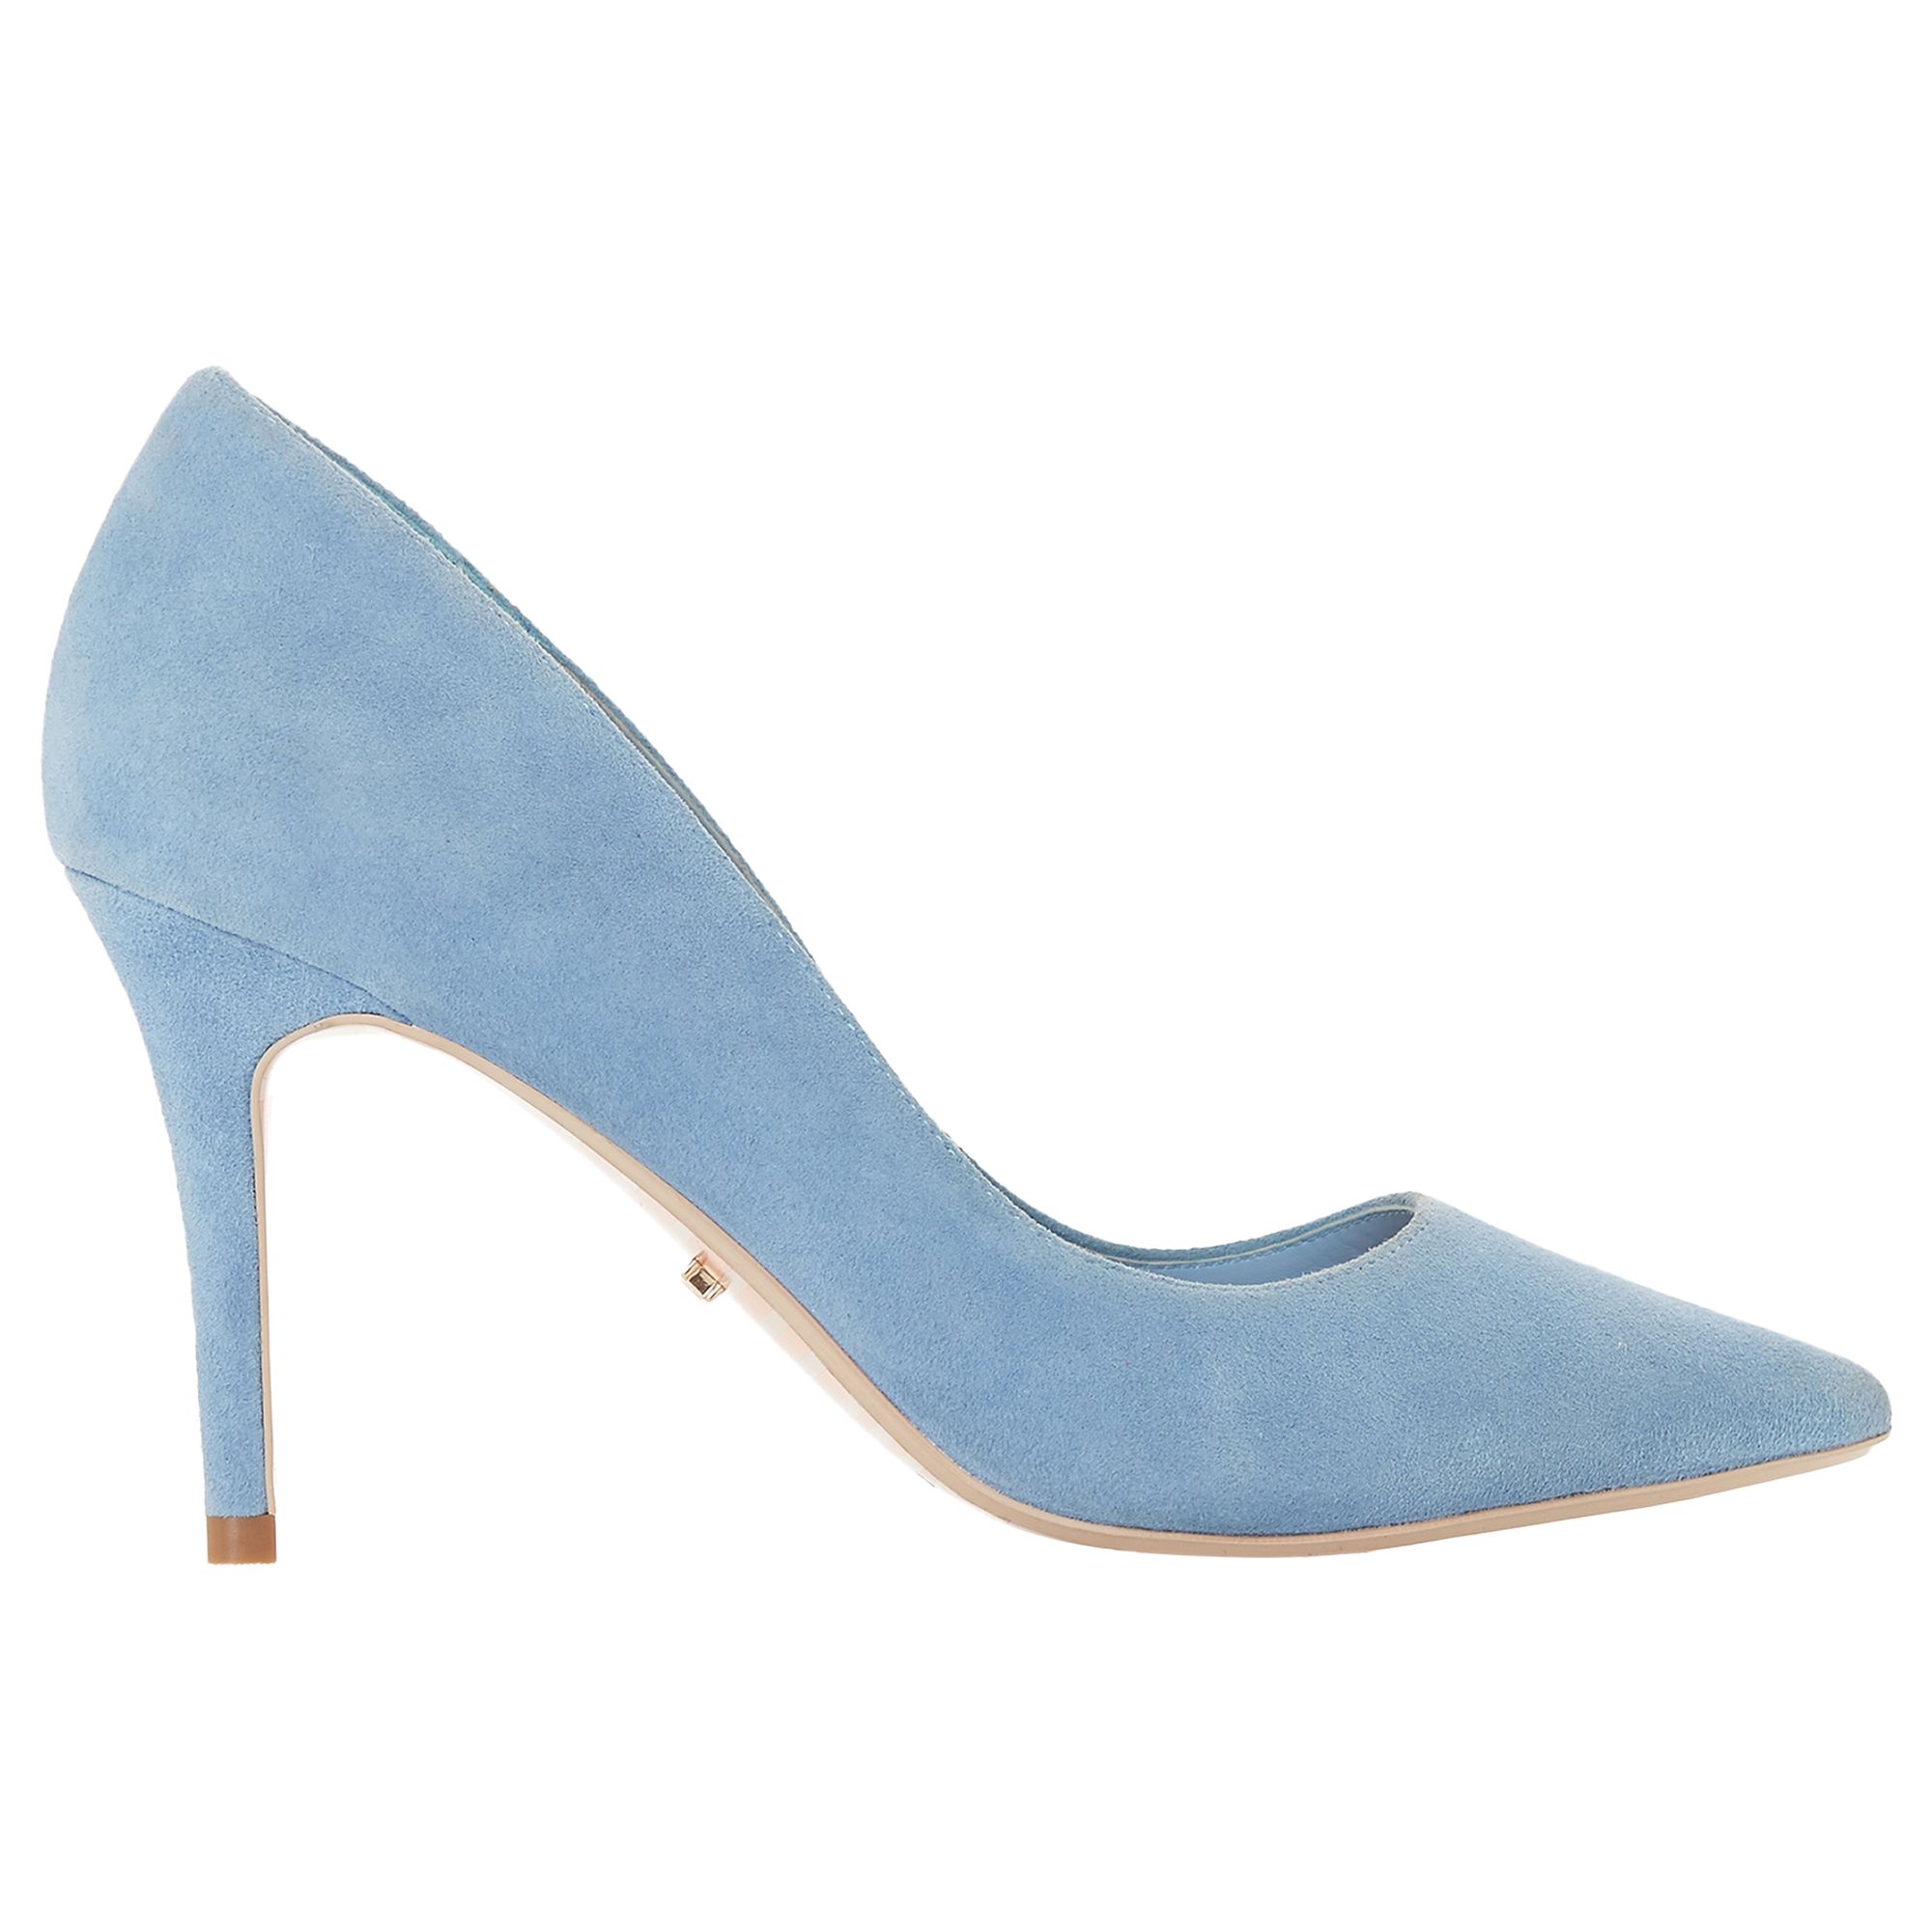 Dune Aurrora Pointed Toe Court Shoes, Blue Suede, 7